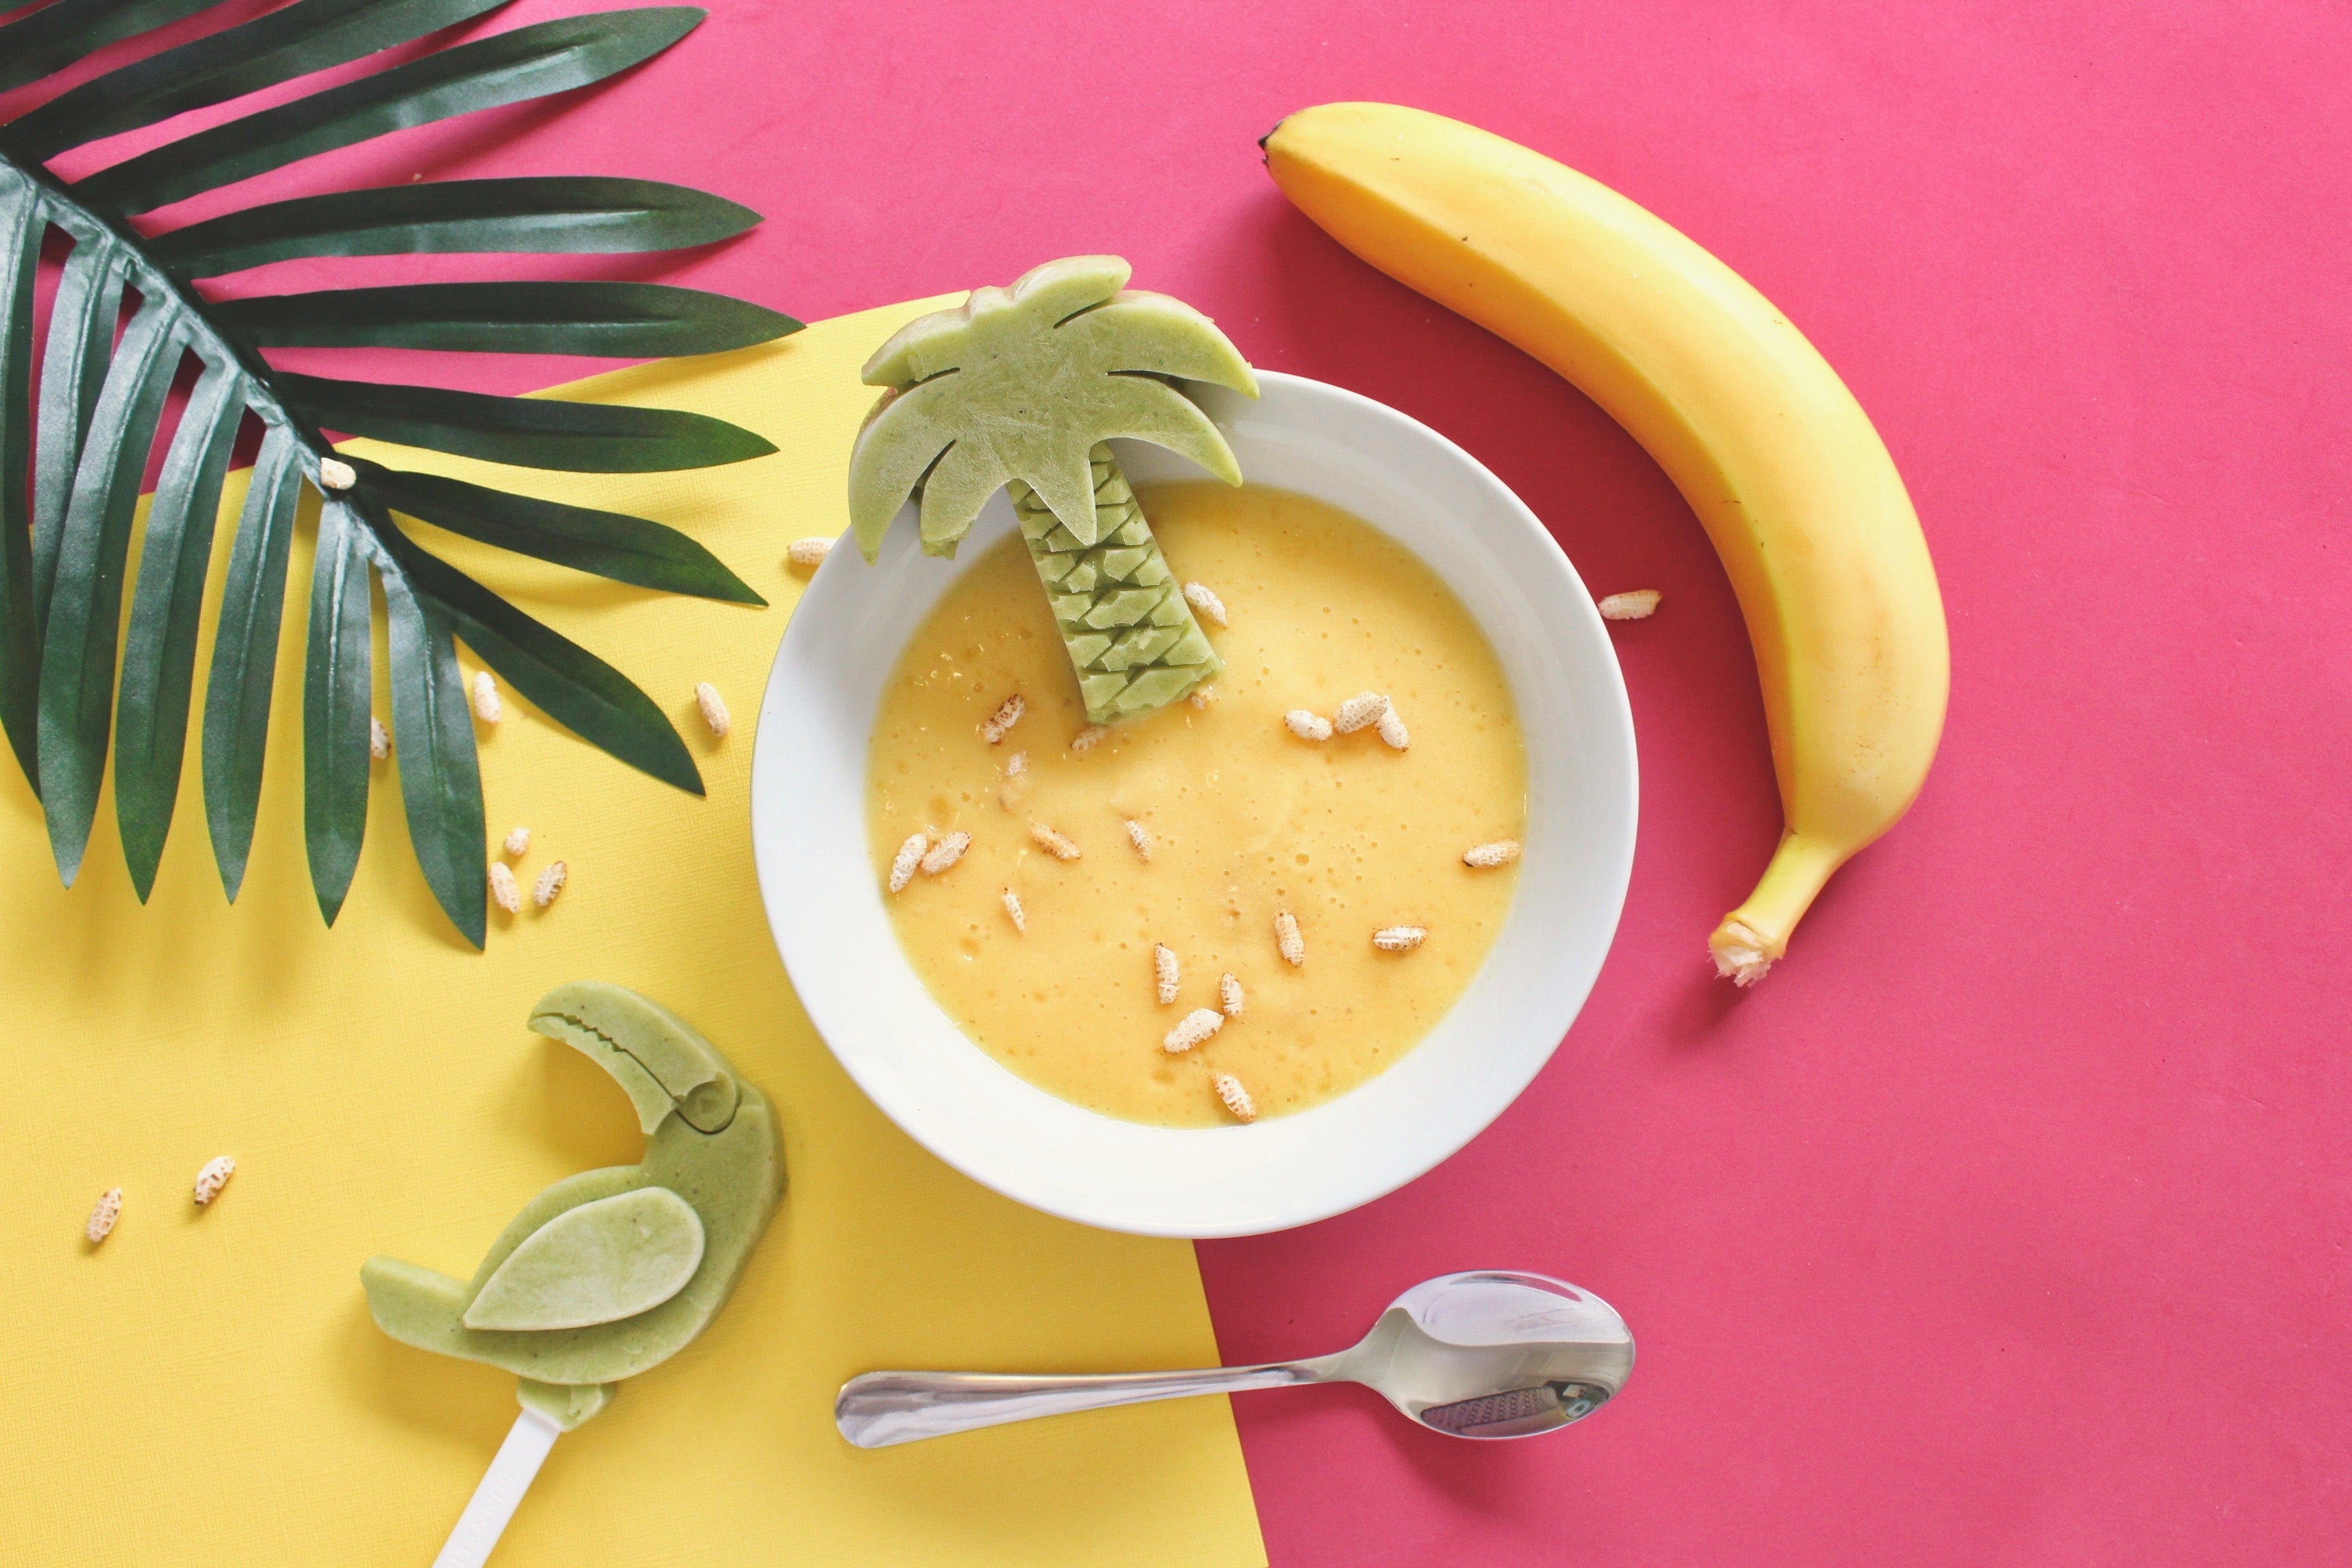 Mashed banana baby food in a bowl against a colorful surface with a banana on the side